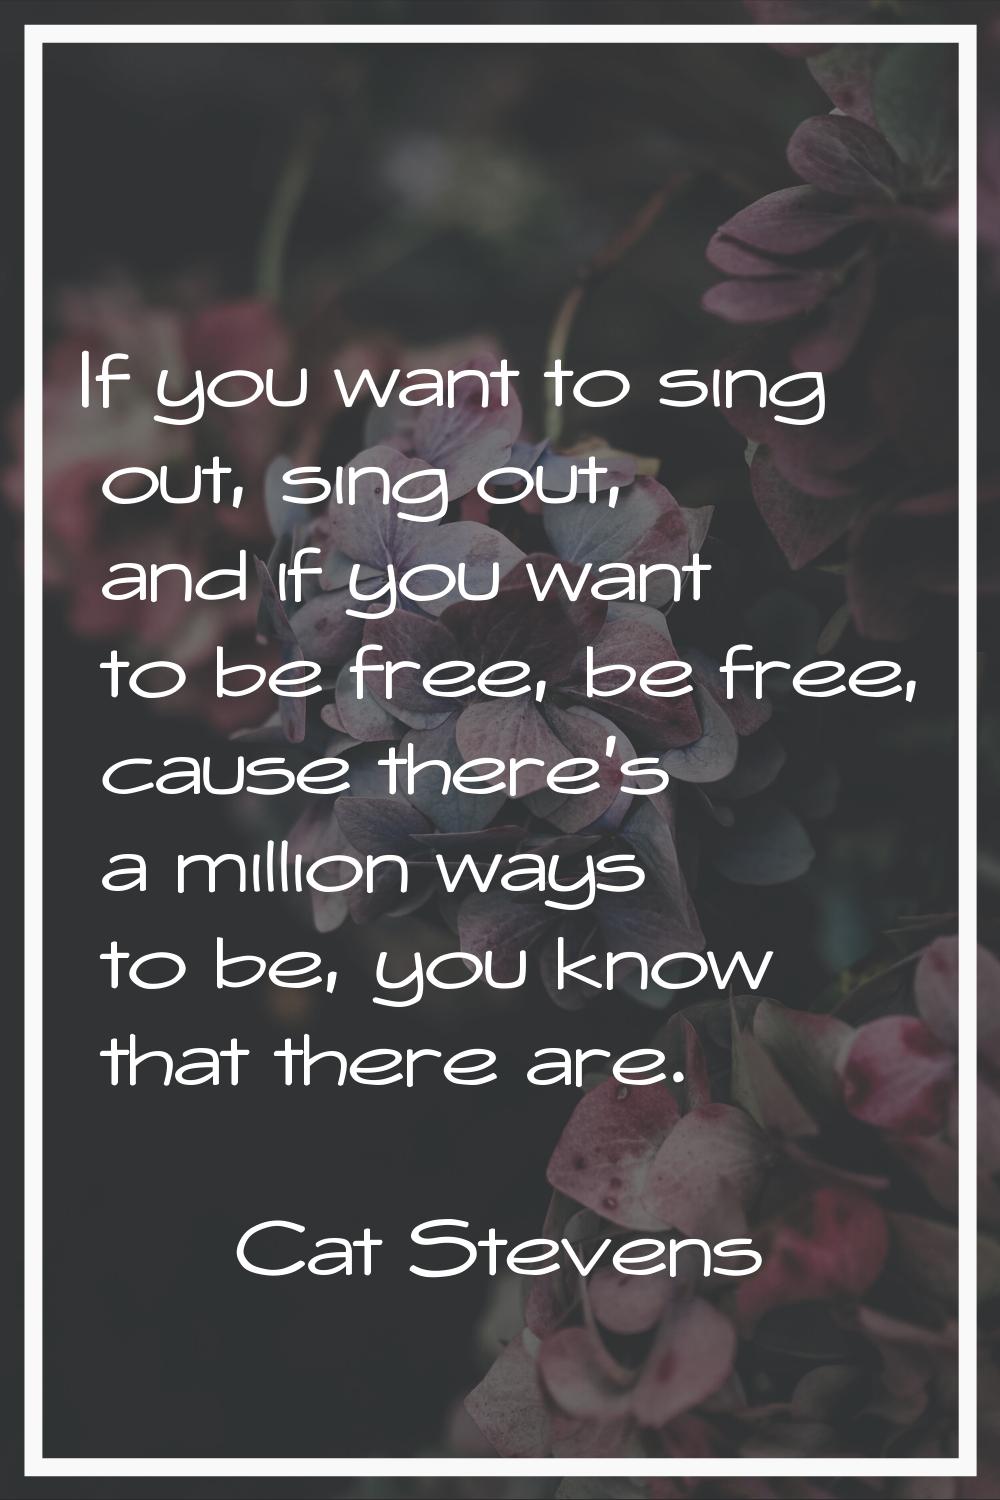 If you want to sing out, sing out, and if you want to be free, be free, cause there's a million way